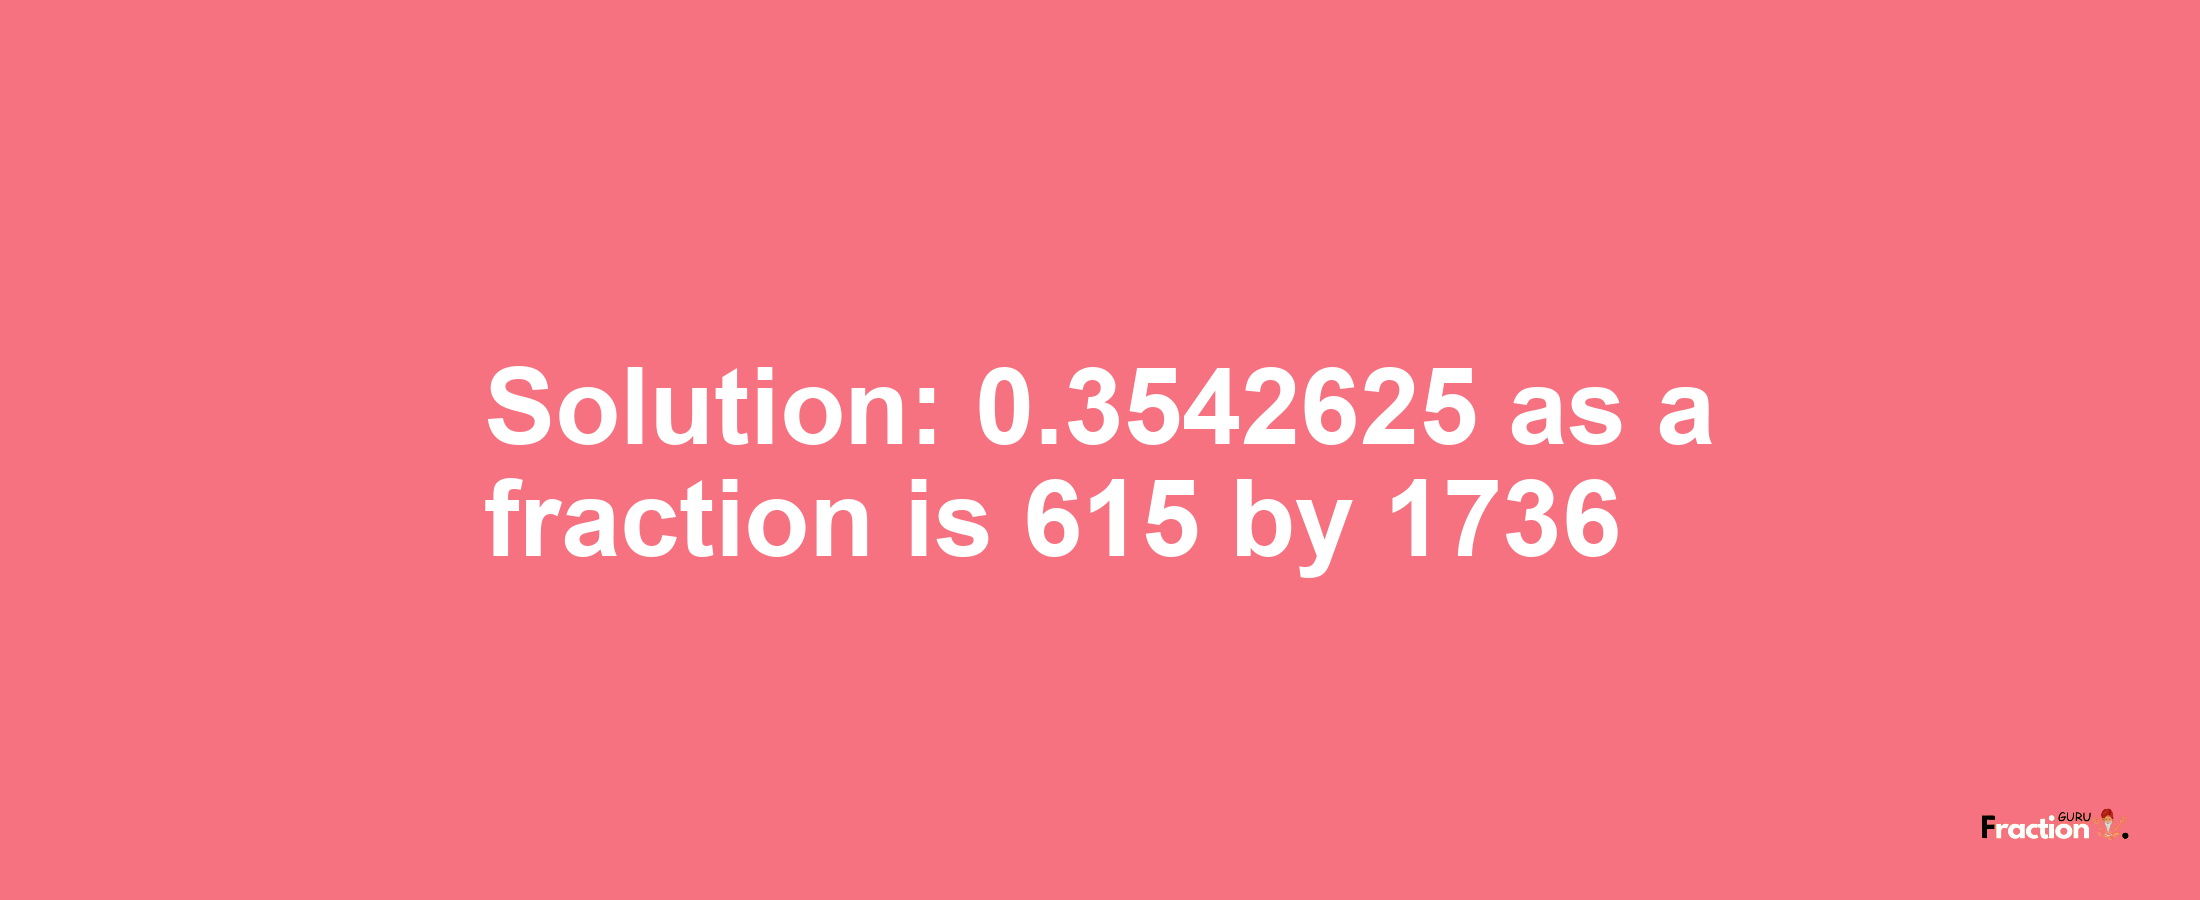 Solution:0.3542625 as a fraction is 615/1736